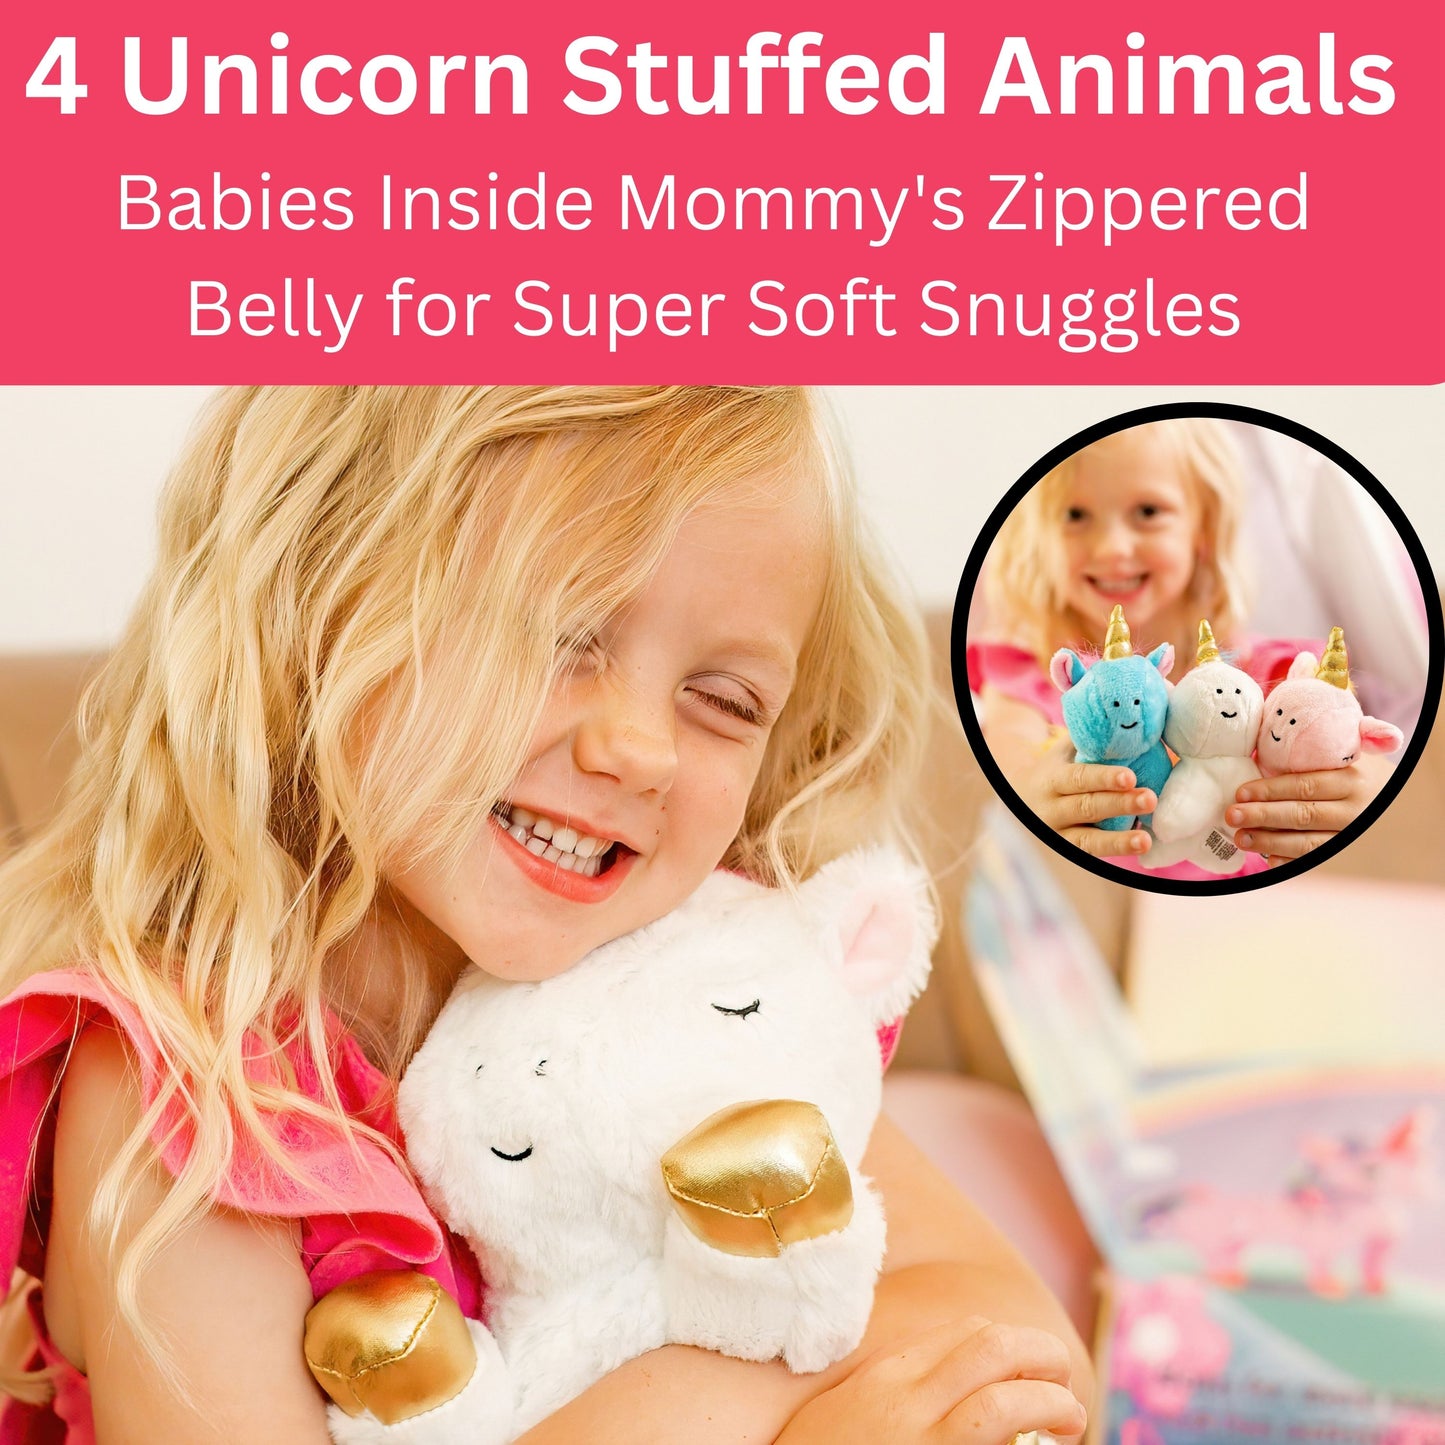 STEM-Certified Unicorn Giftset - A Showcase Gift for Girls Complete w/ Unicorn Crafts & Unicorn Toys - Includes Mama & Baby Unicorn Family, Painting Kit, DIY Jewelry & More